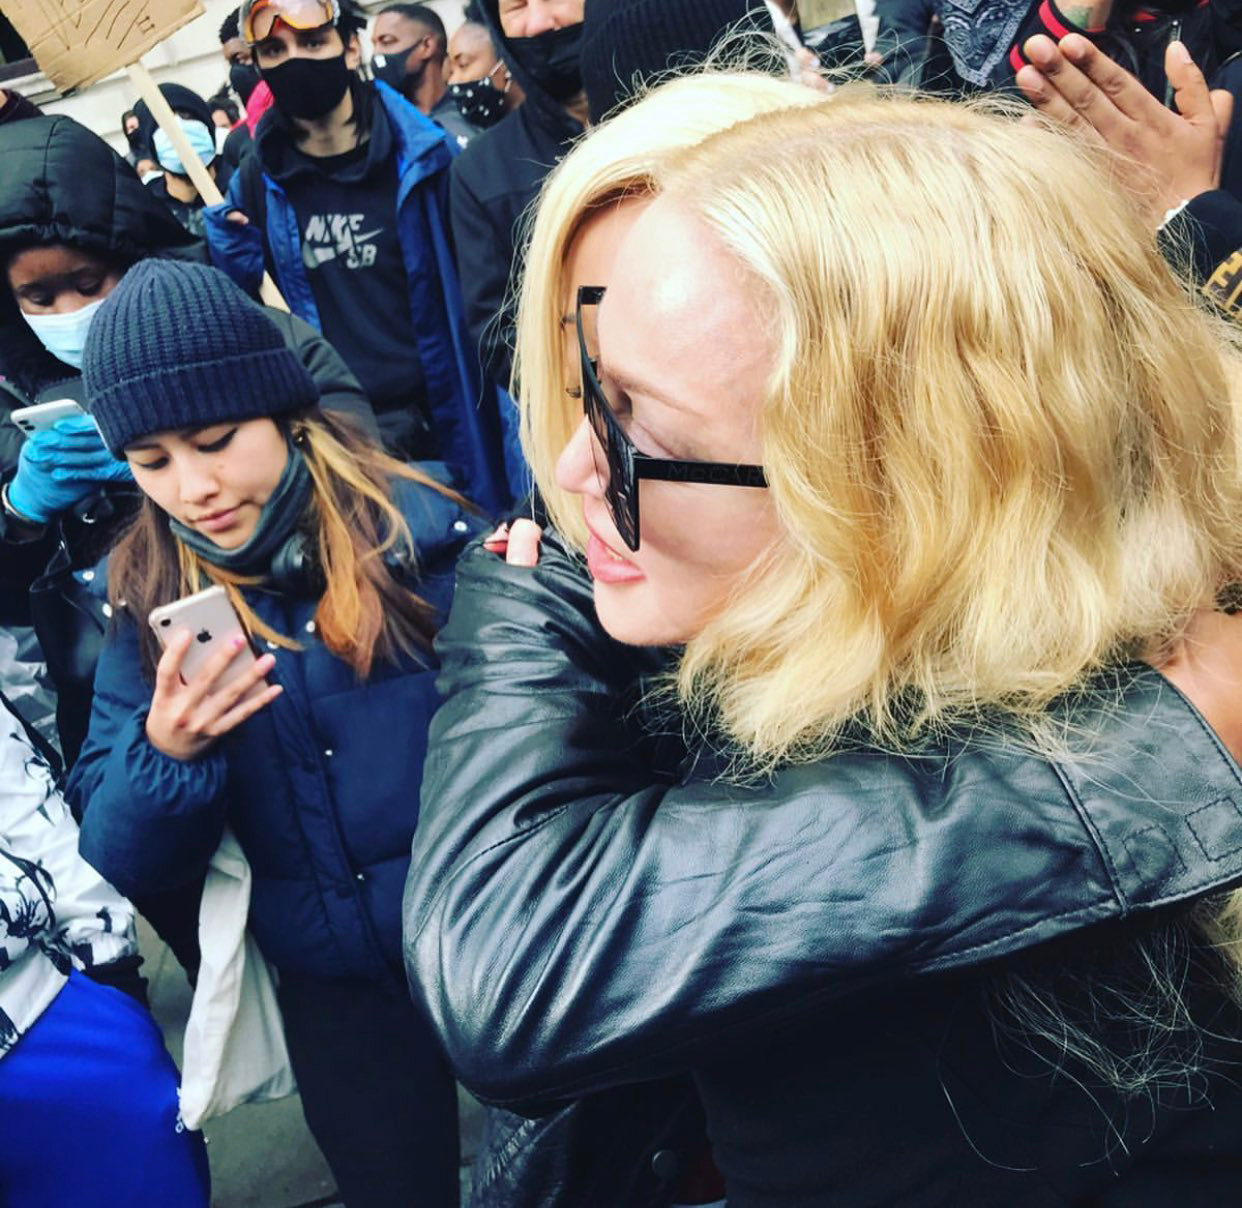 Madonna joined the Black Lives Matter protest in London, together with son David and daughter Mercy James.